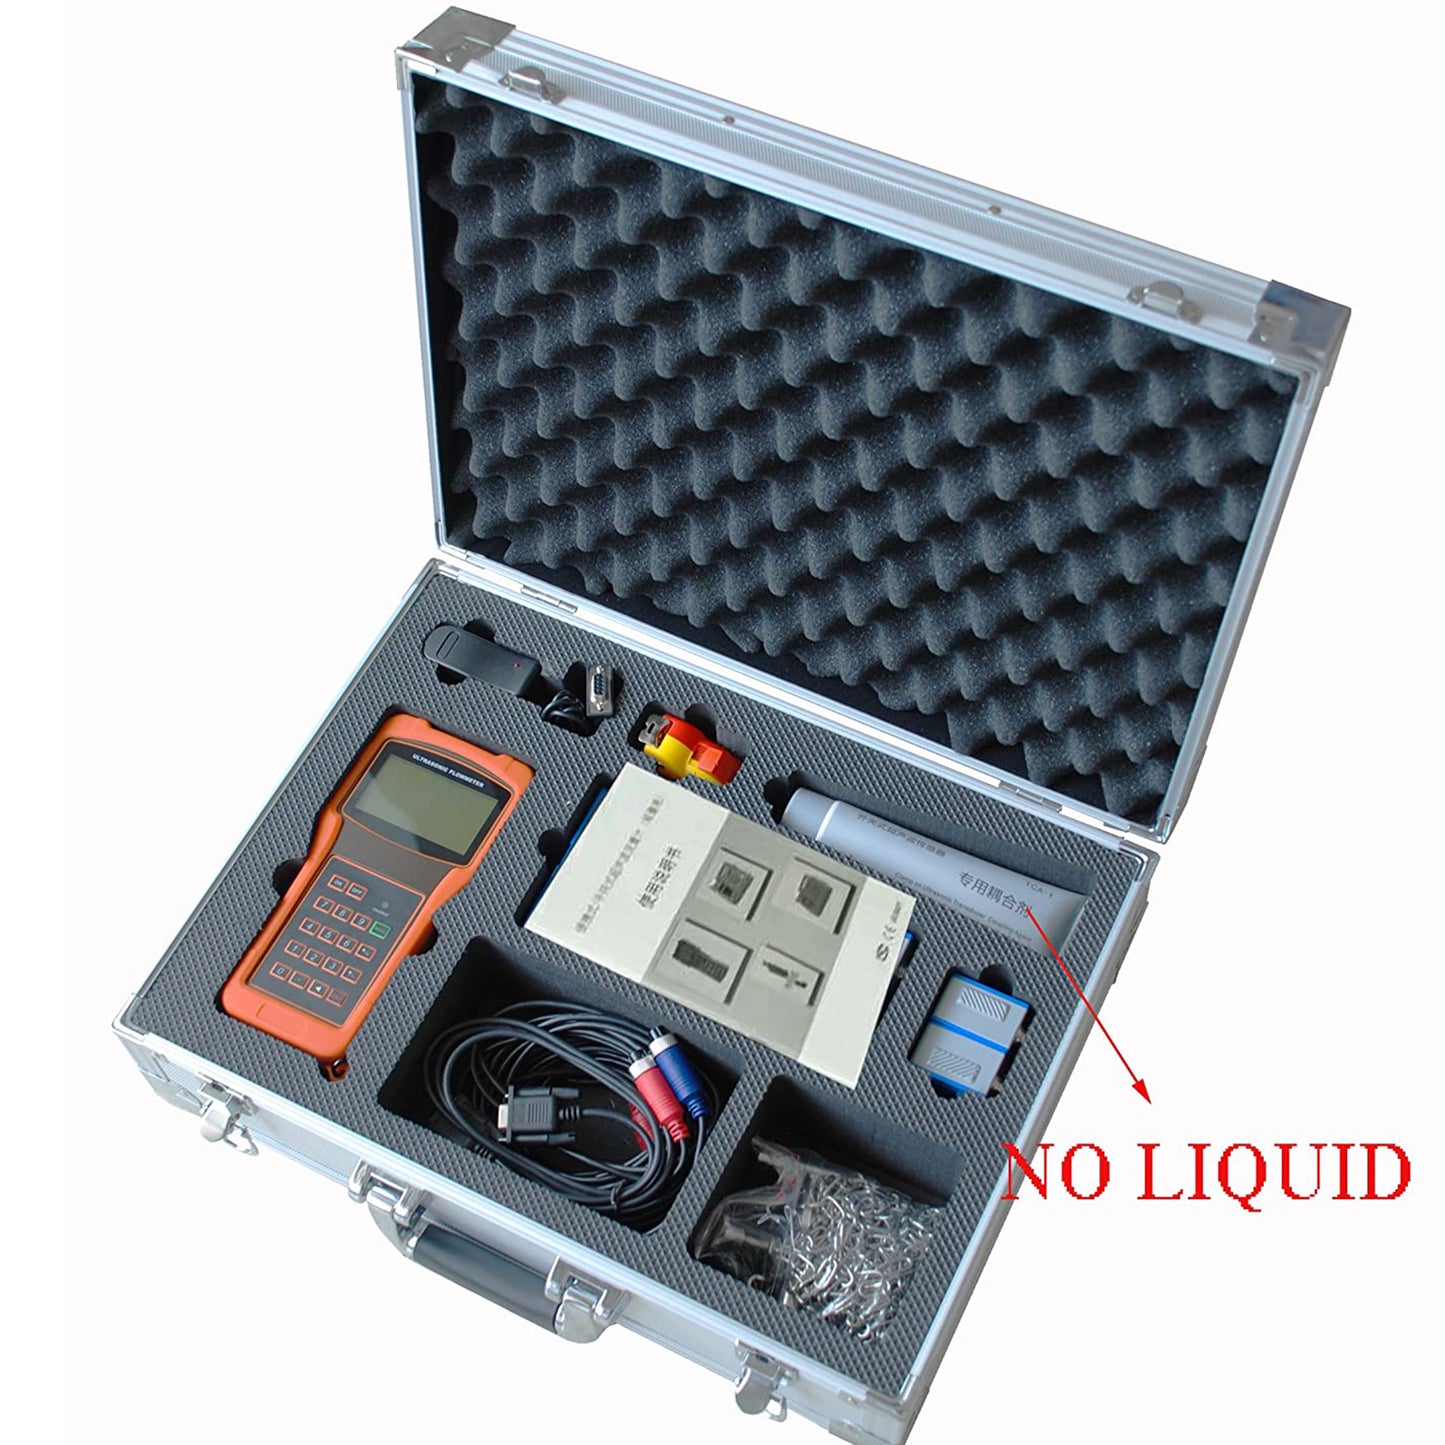 VTSYIQI Portable Ultrasonic Flow Meter Digital Liquid Flow Meter With TL-1 Transducer Measuring Range DN300 to 6000mm 11.8 to 236.22in